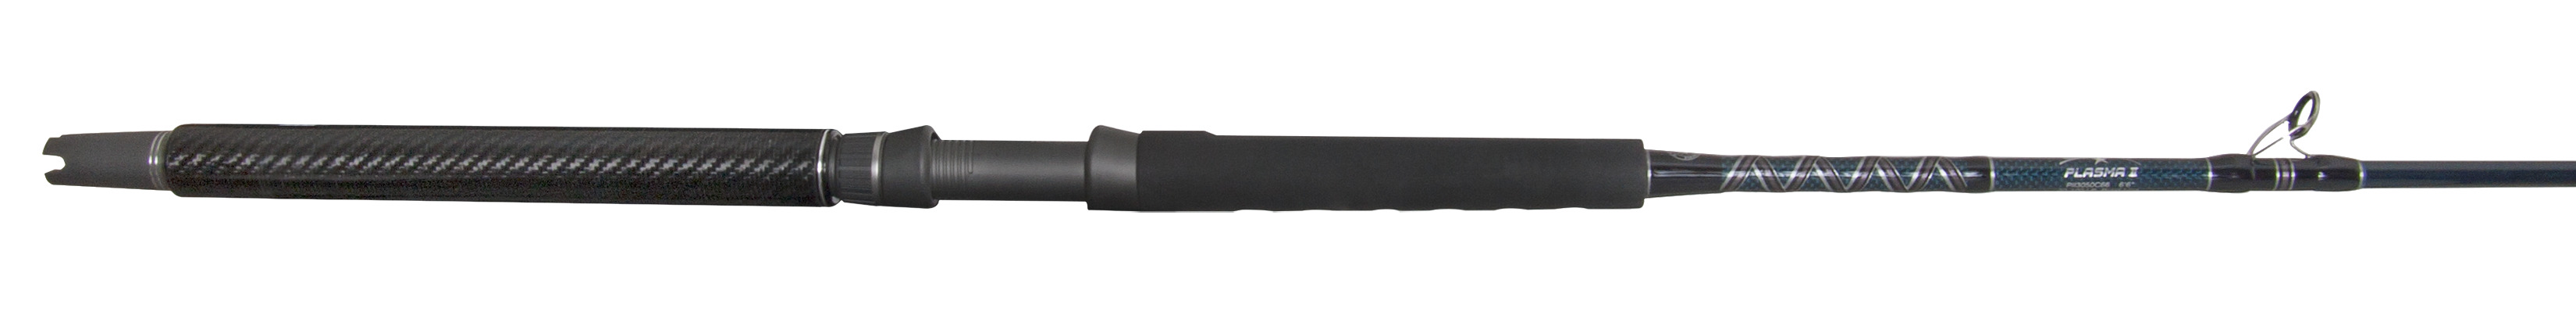 Star Rod, Plasma II Boat Conventional Rod, 15-30lb, K Guide Sic Carbon Butt